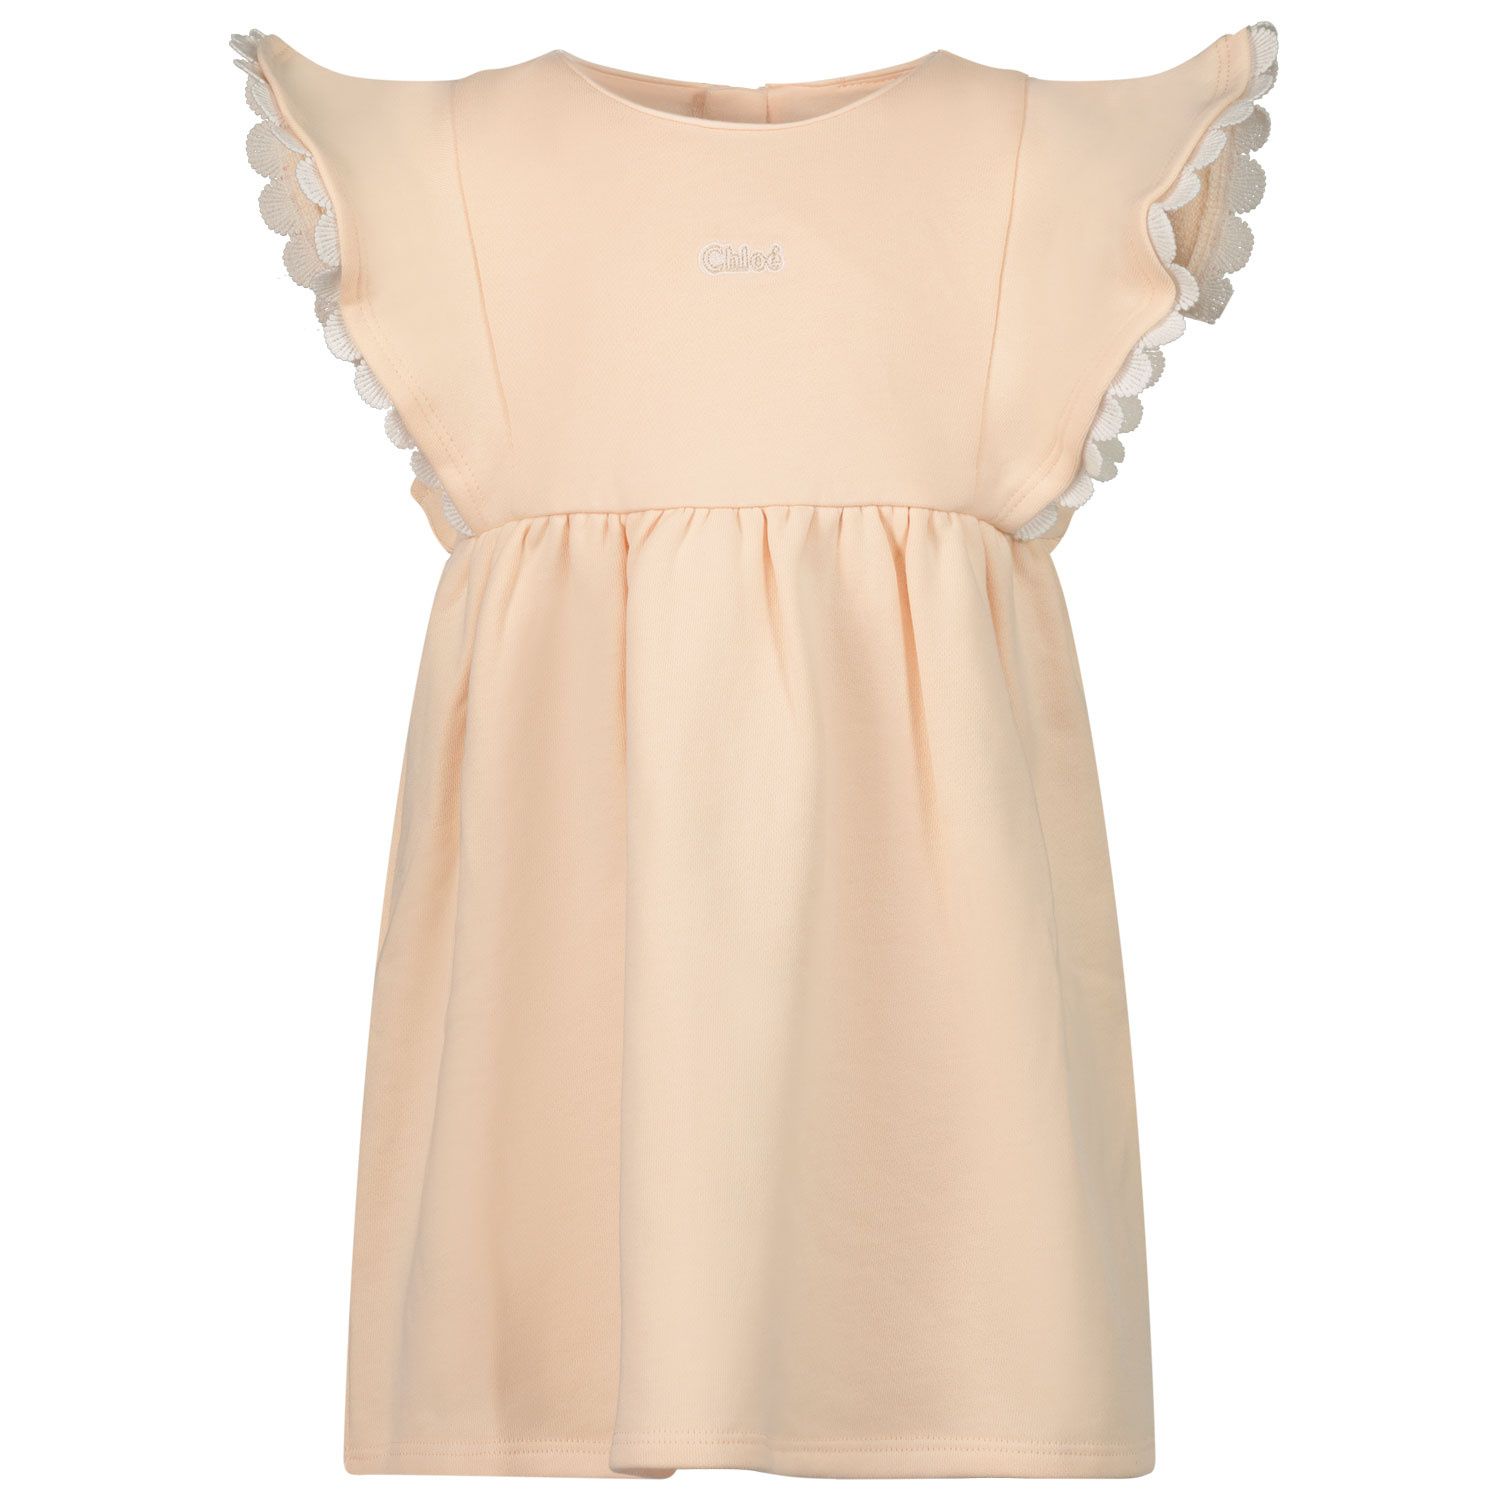 Picture of Chloe C02314 baby dress light pink